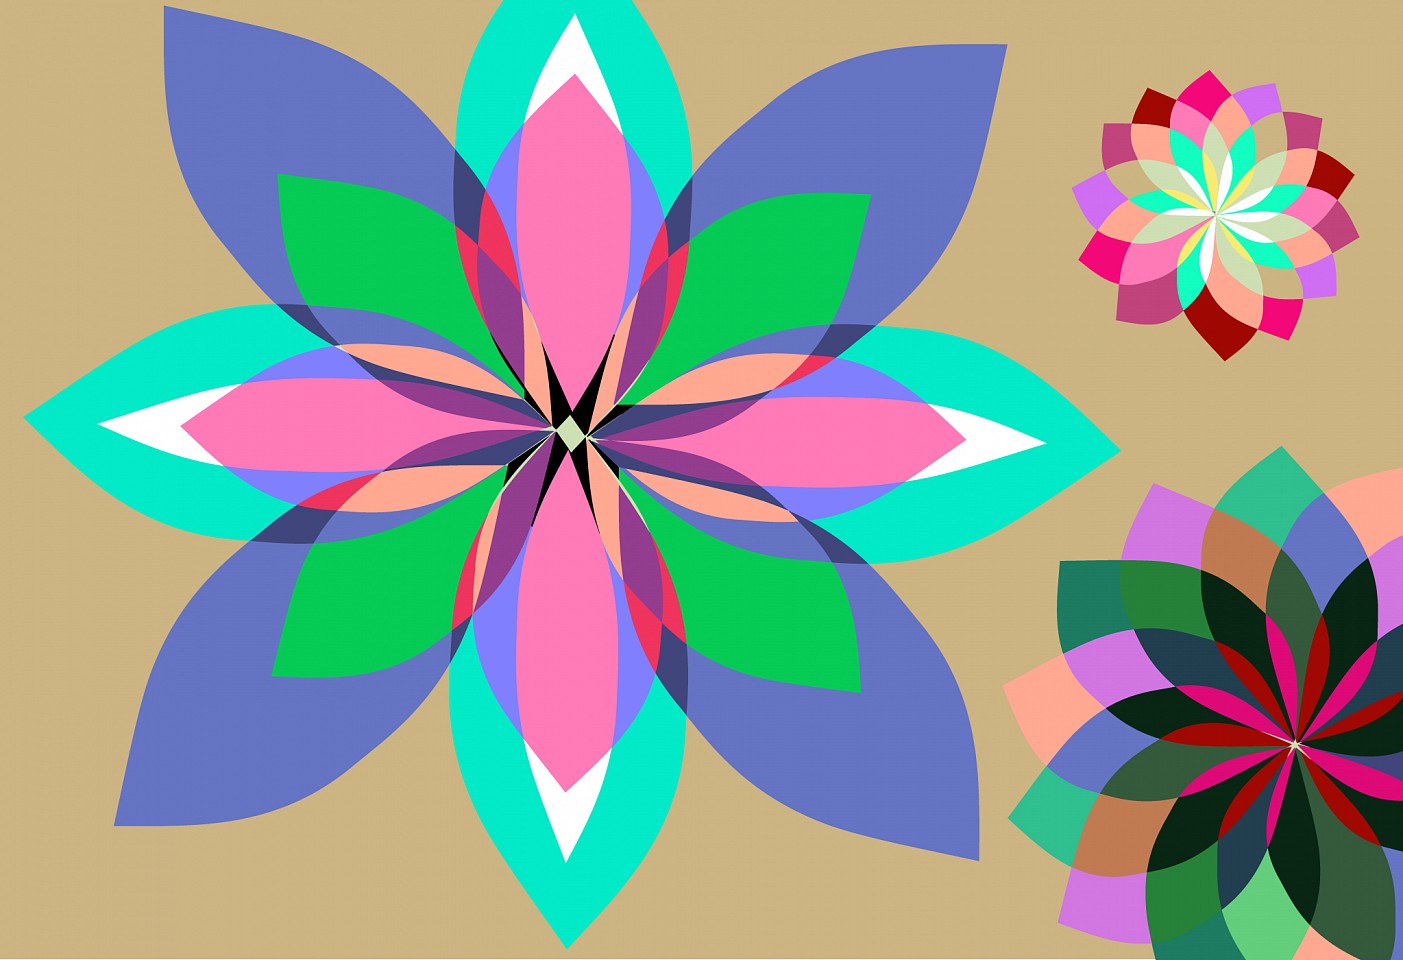 Dane Albert, Floral #5, 2023
Acrylic on canvas (Concept), 48 x 72 in. (121.9 x 182.9 cm)
Series of colored lines and shapes in multiple configurations
DA.2023.floral-005